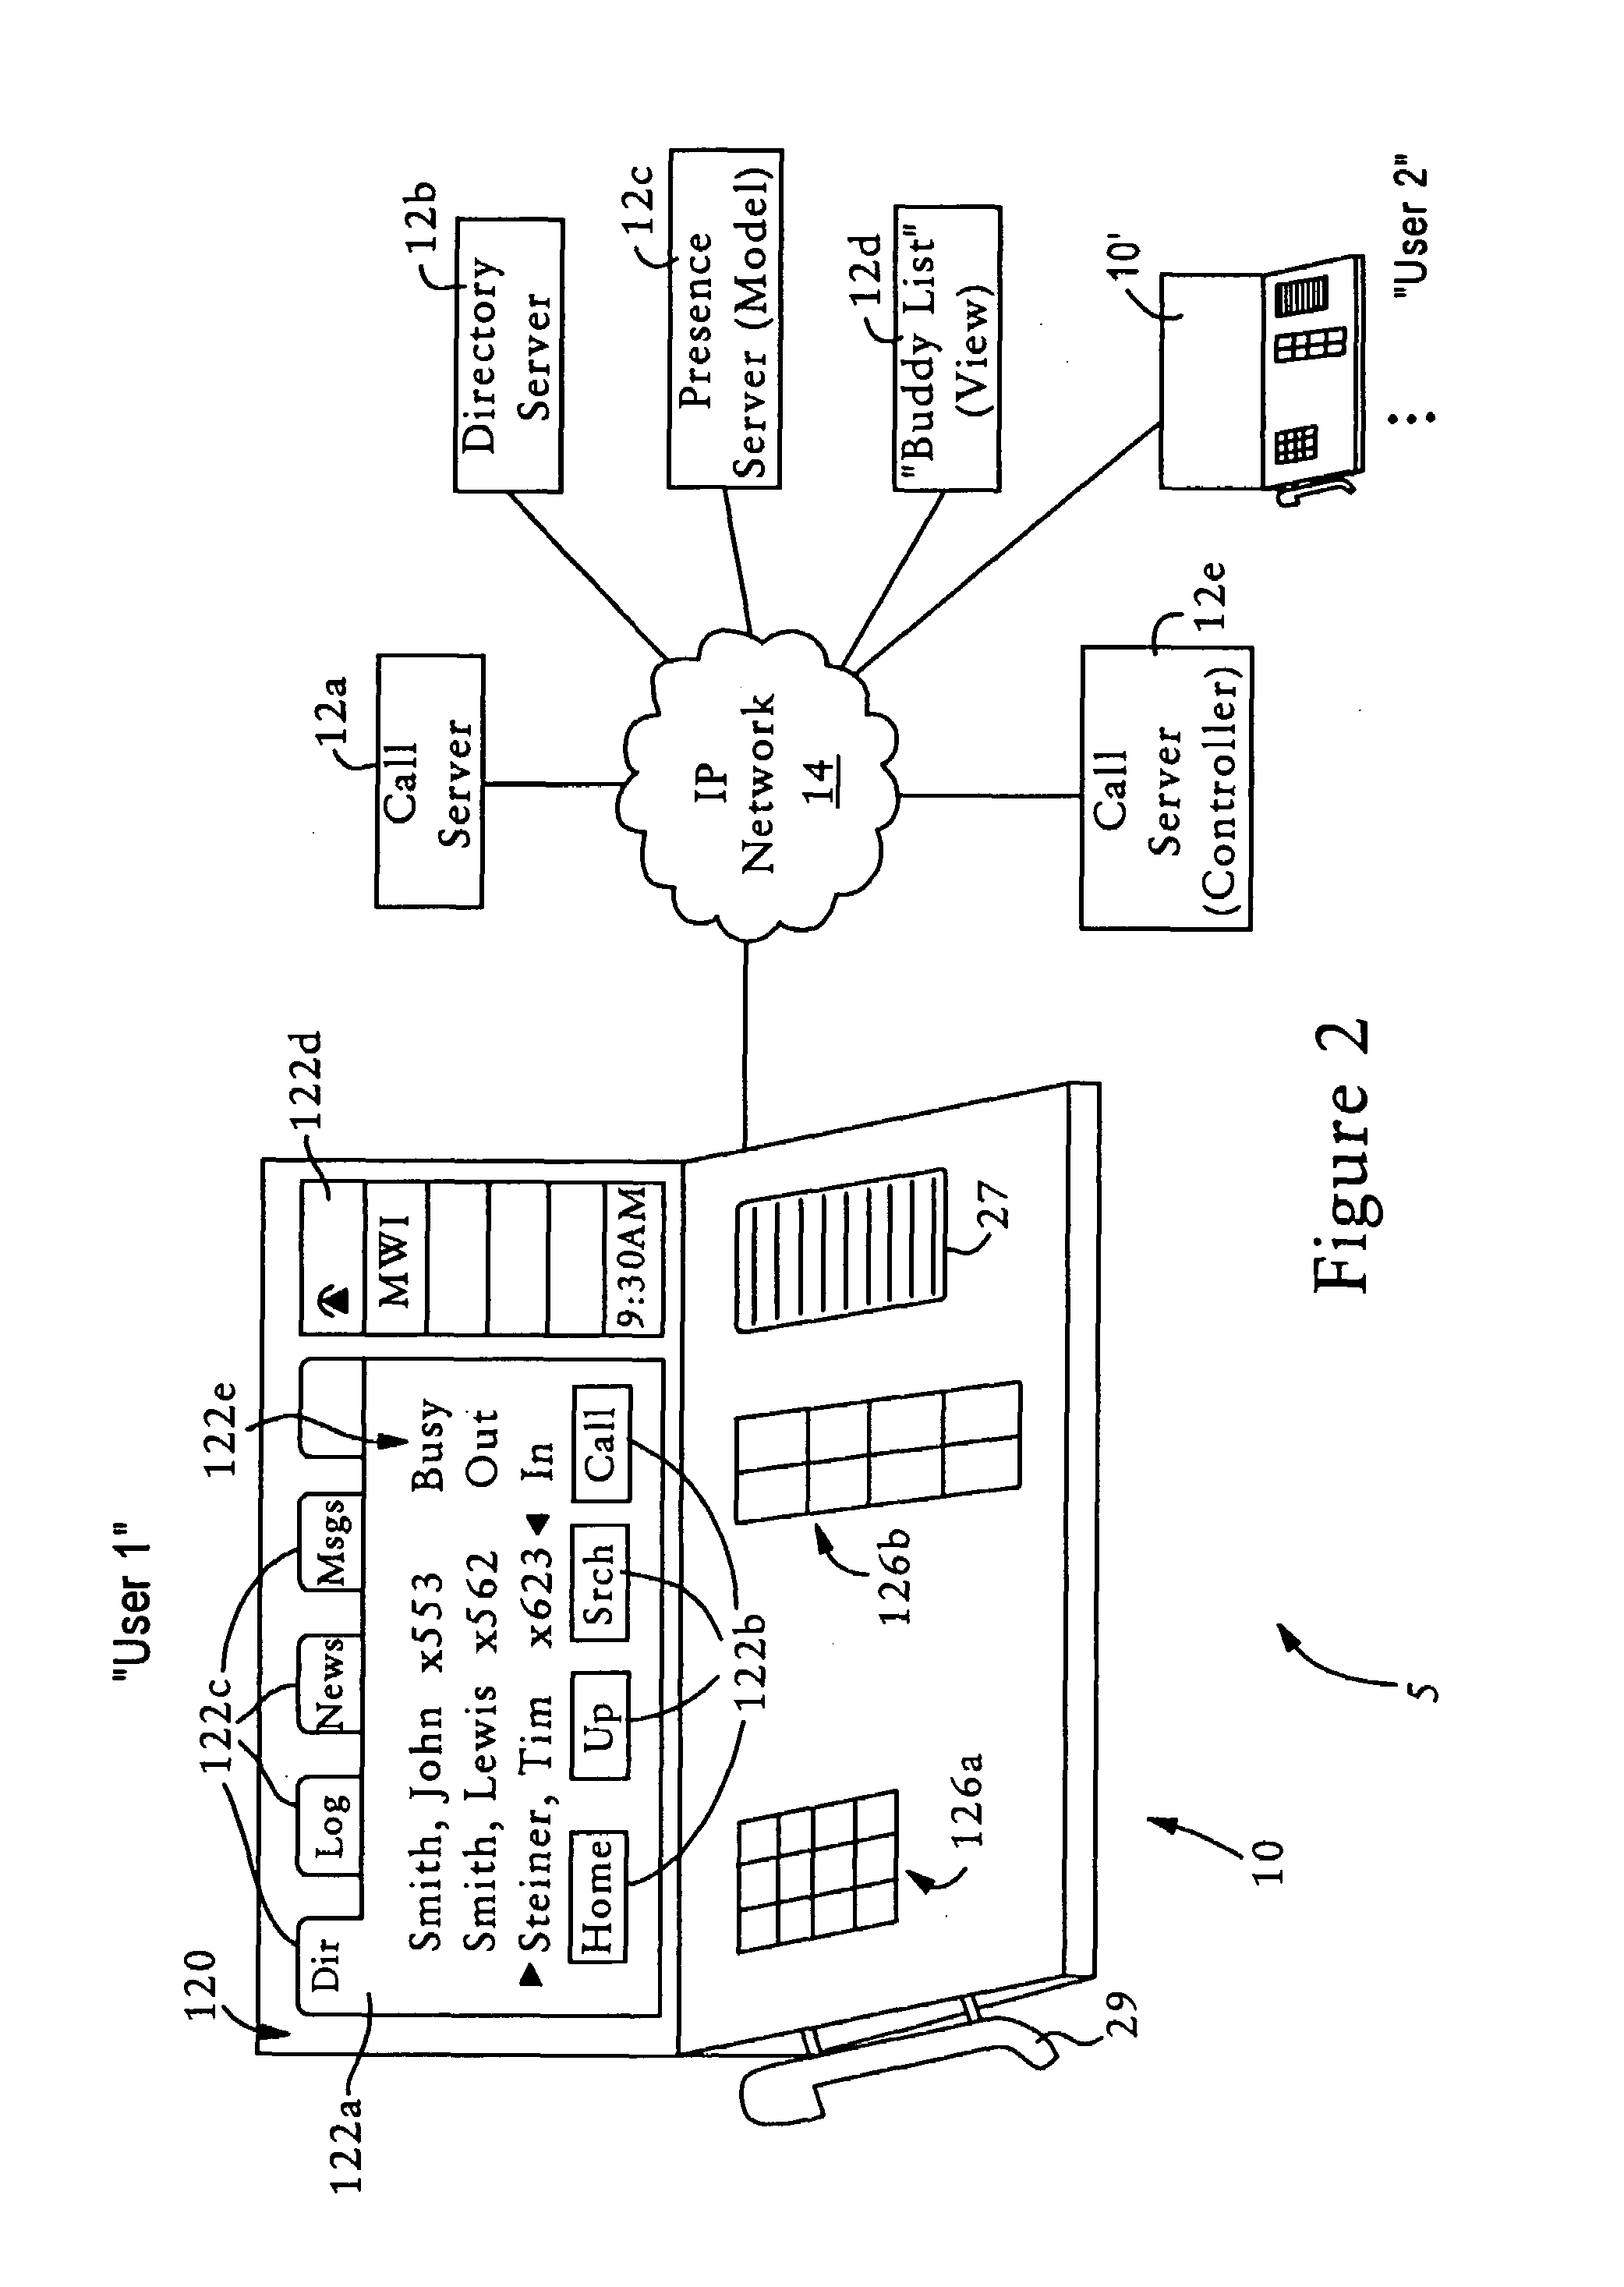 Delivery of services to a network enabled telephony device based on transfer of selected model view controller objects to reachable network nodes